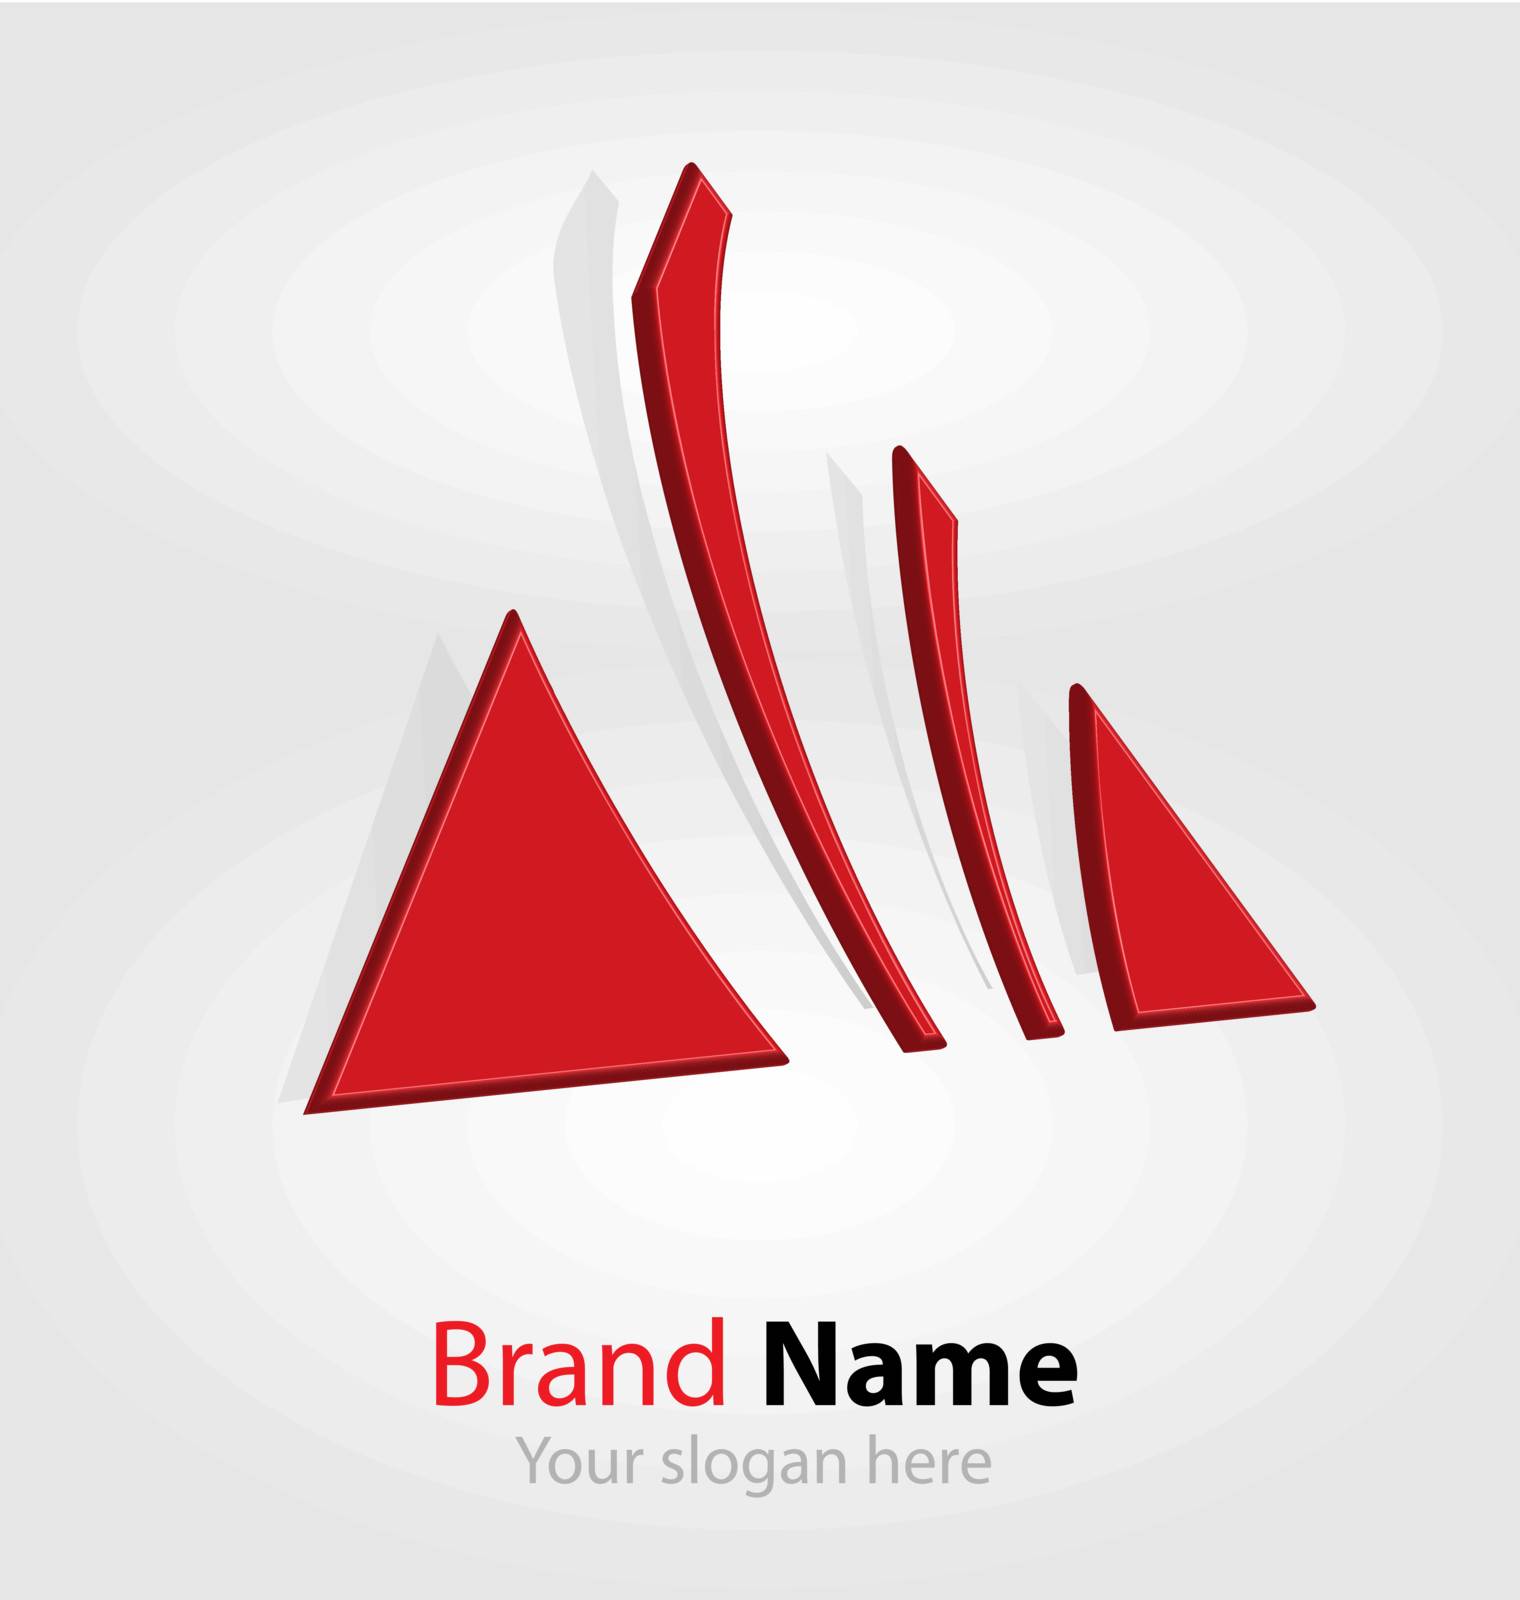 Abstract brand logo/logotype by Mysteriousman